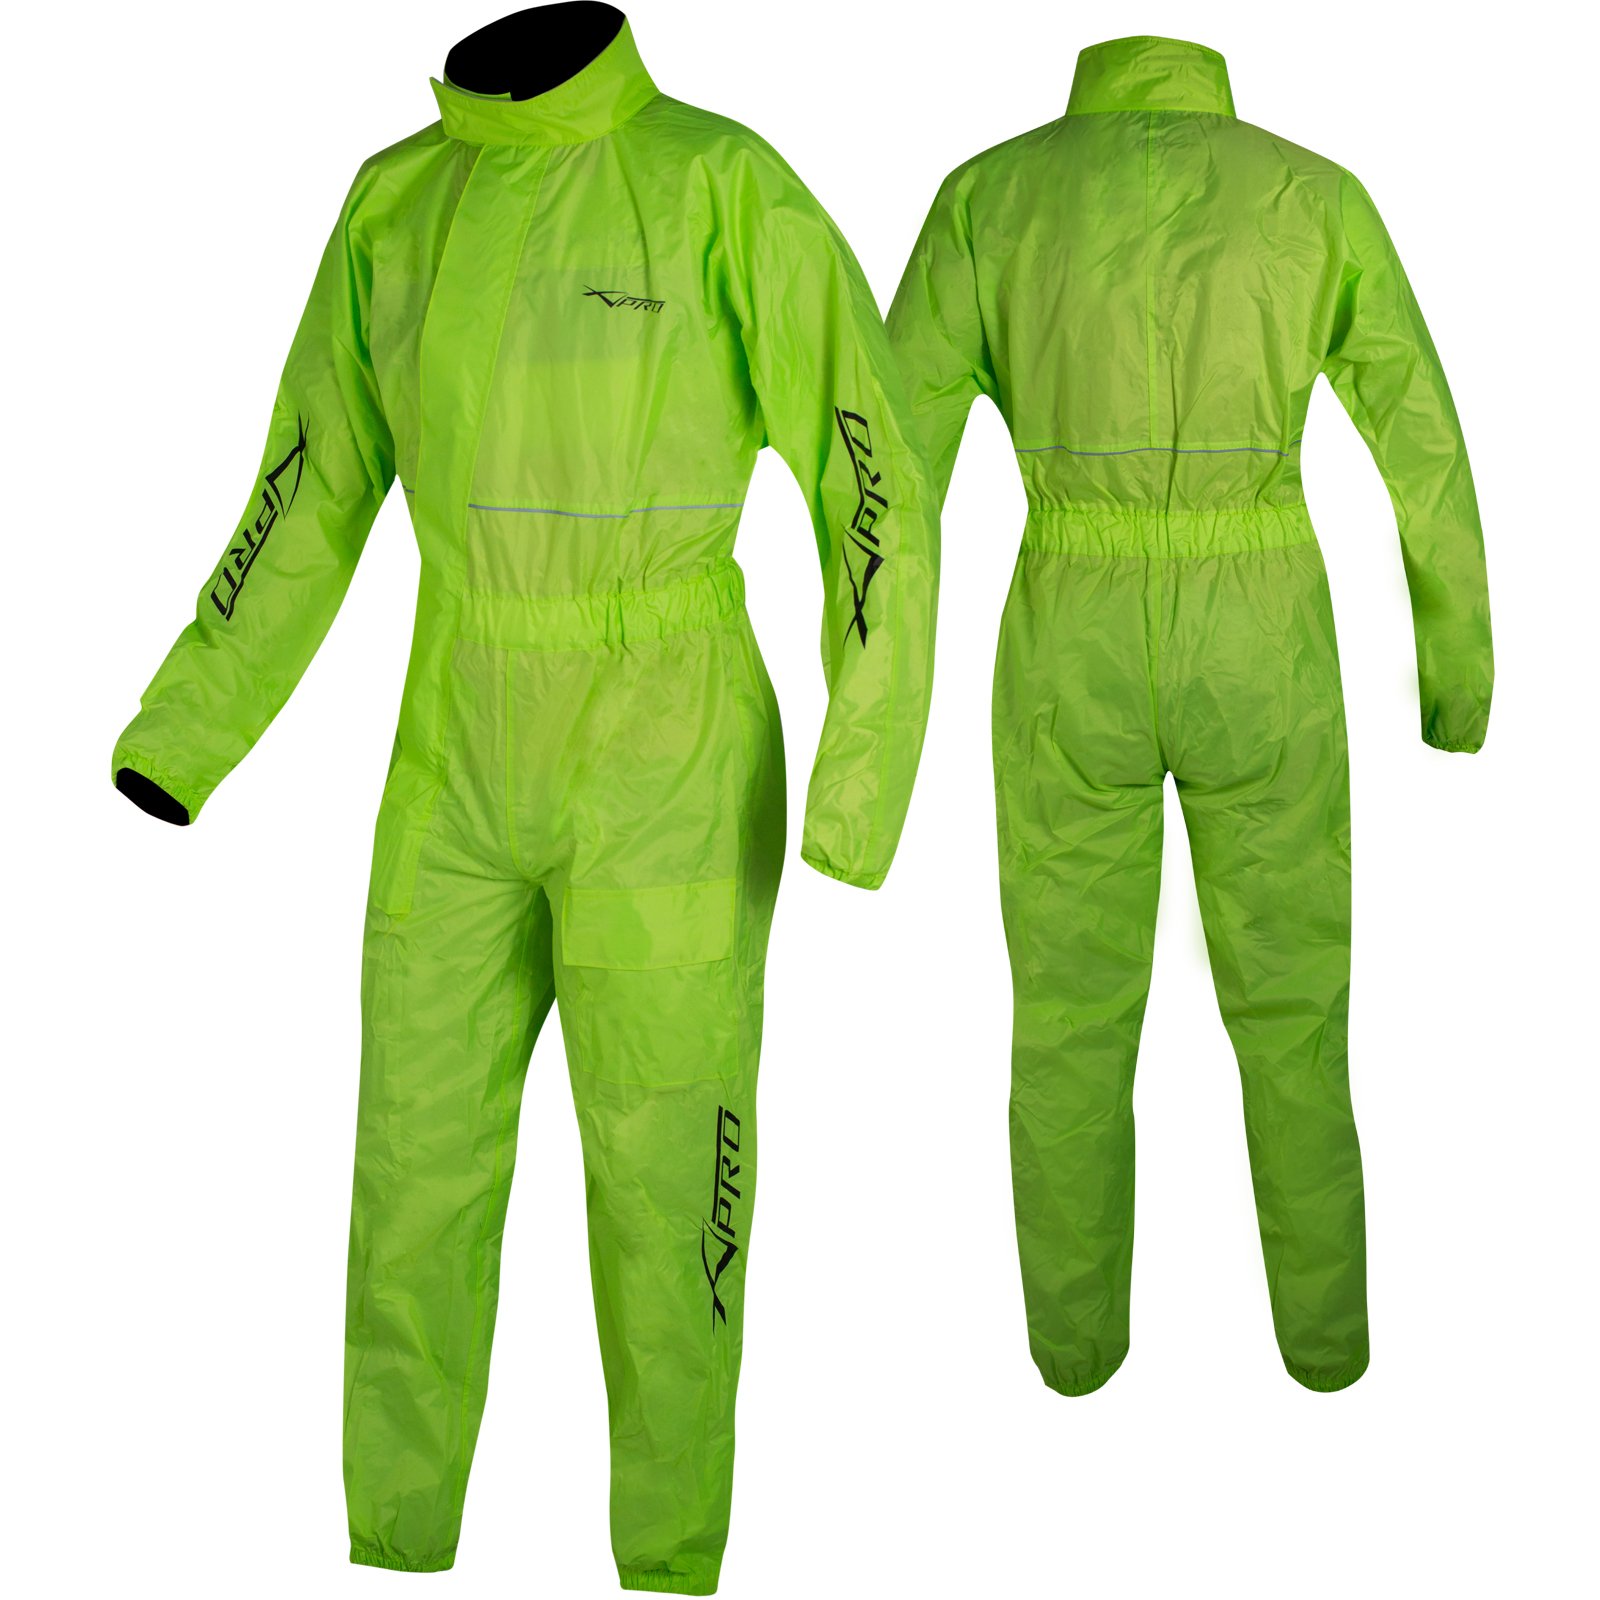 A-Pro Motorcycle Motorbike Waterproof Full Body One 1 pc Rain Over Suit Fluo L von A-Pro